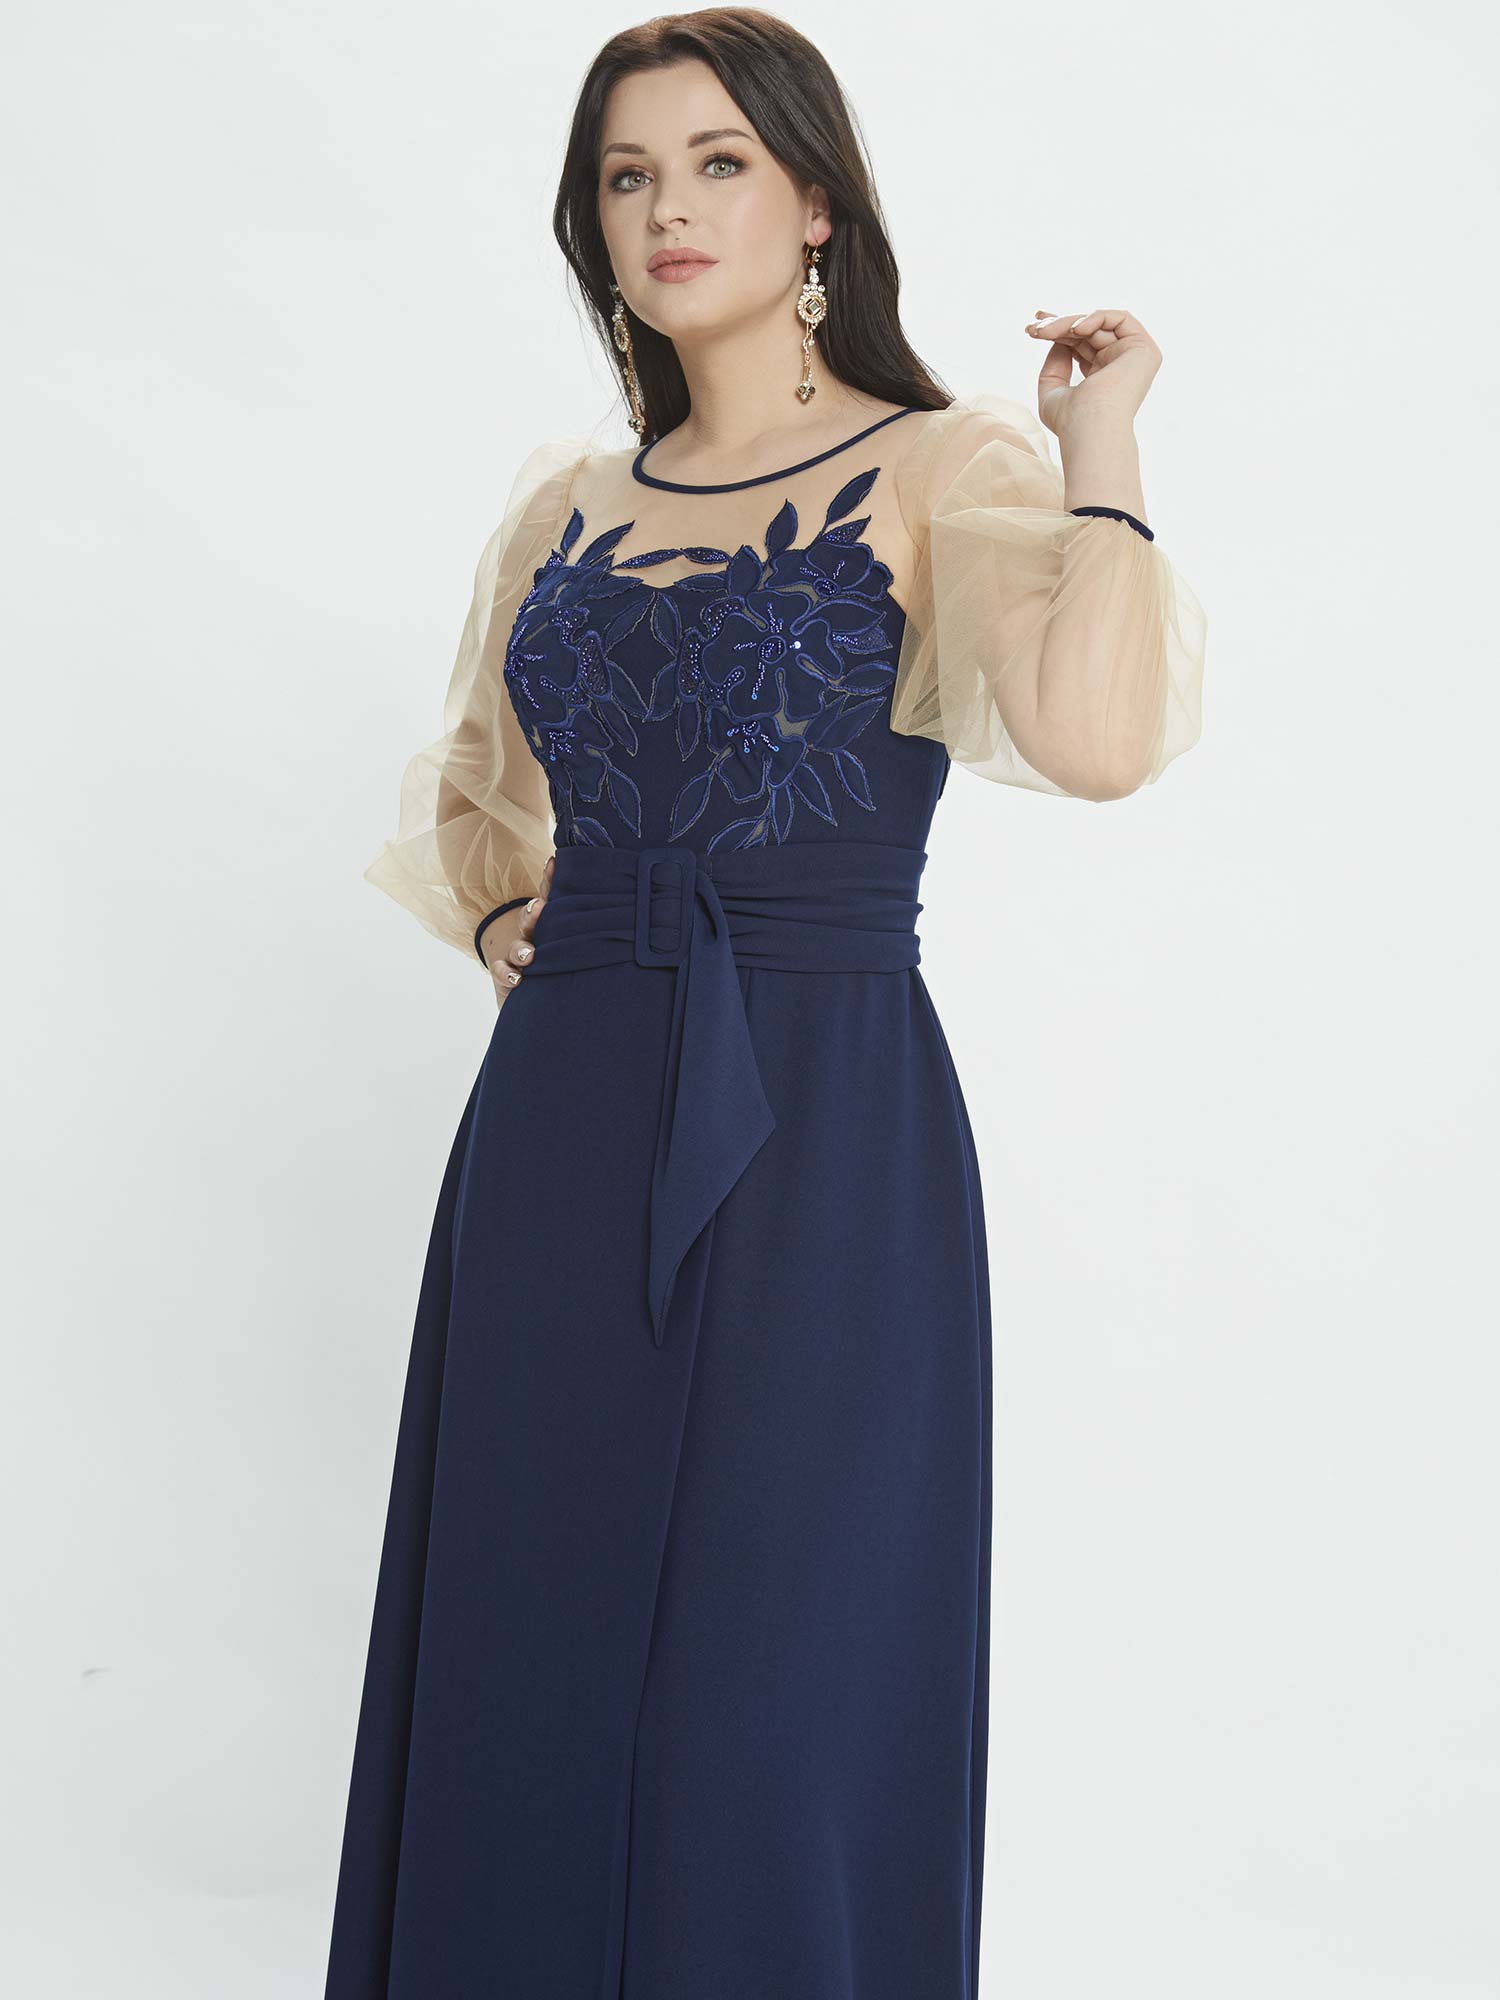 Maxi dress with bishop sleeves and belt at waist